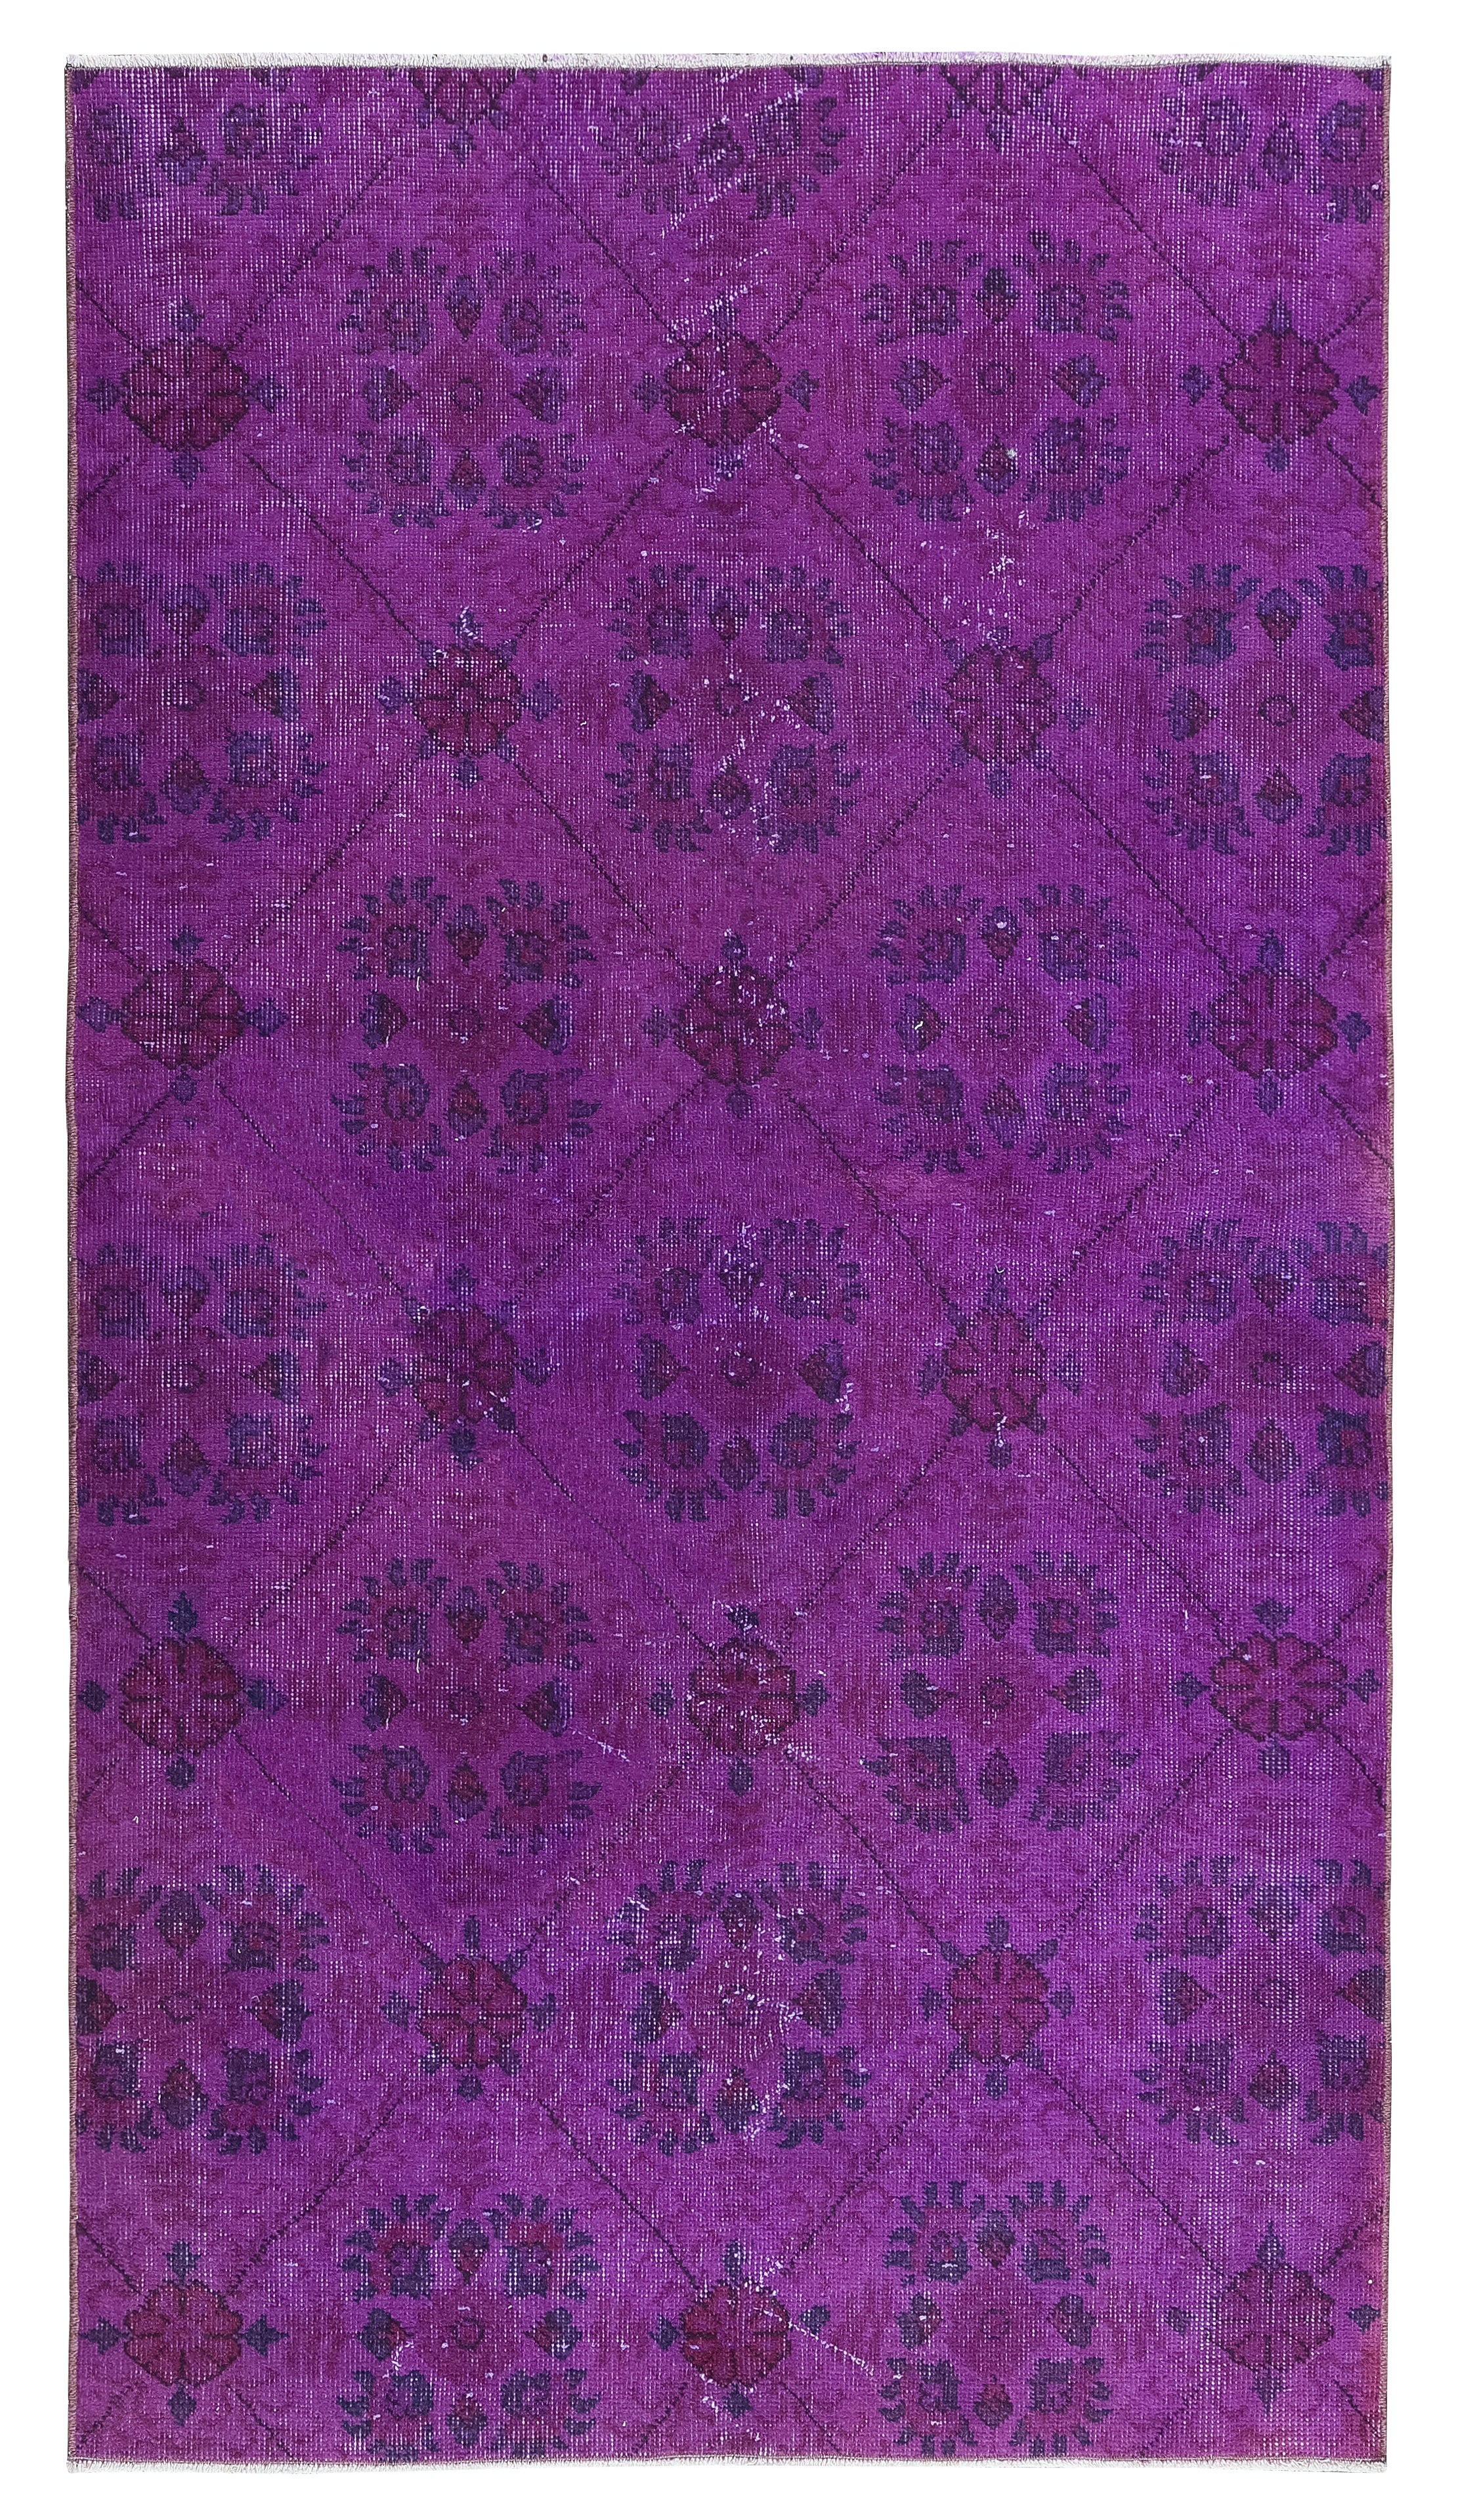 3.6x6.4 Ft Hand Knotted Accent Rug, Purple Floral Design Carpet from Turkey